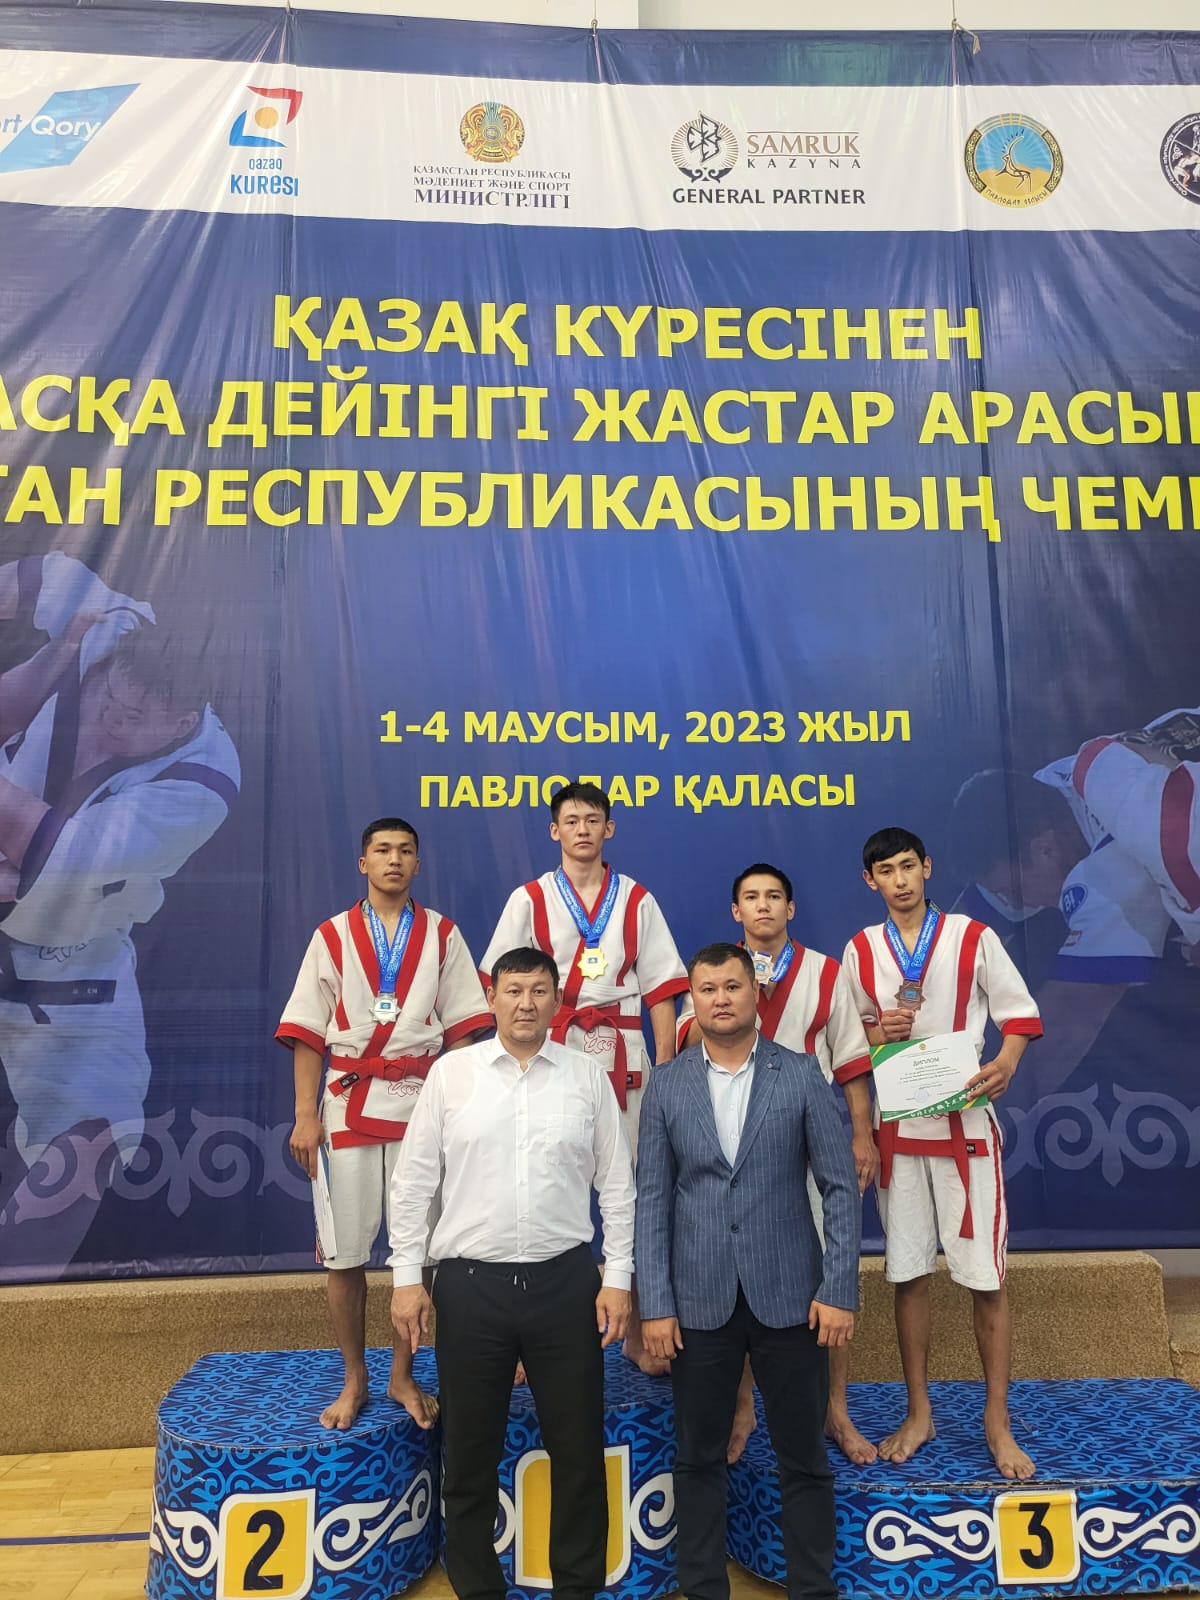 A student of Altynsarin Institute became the champion of Kazakhstan in Kazakh kuresi